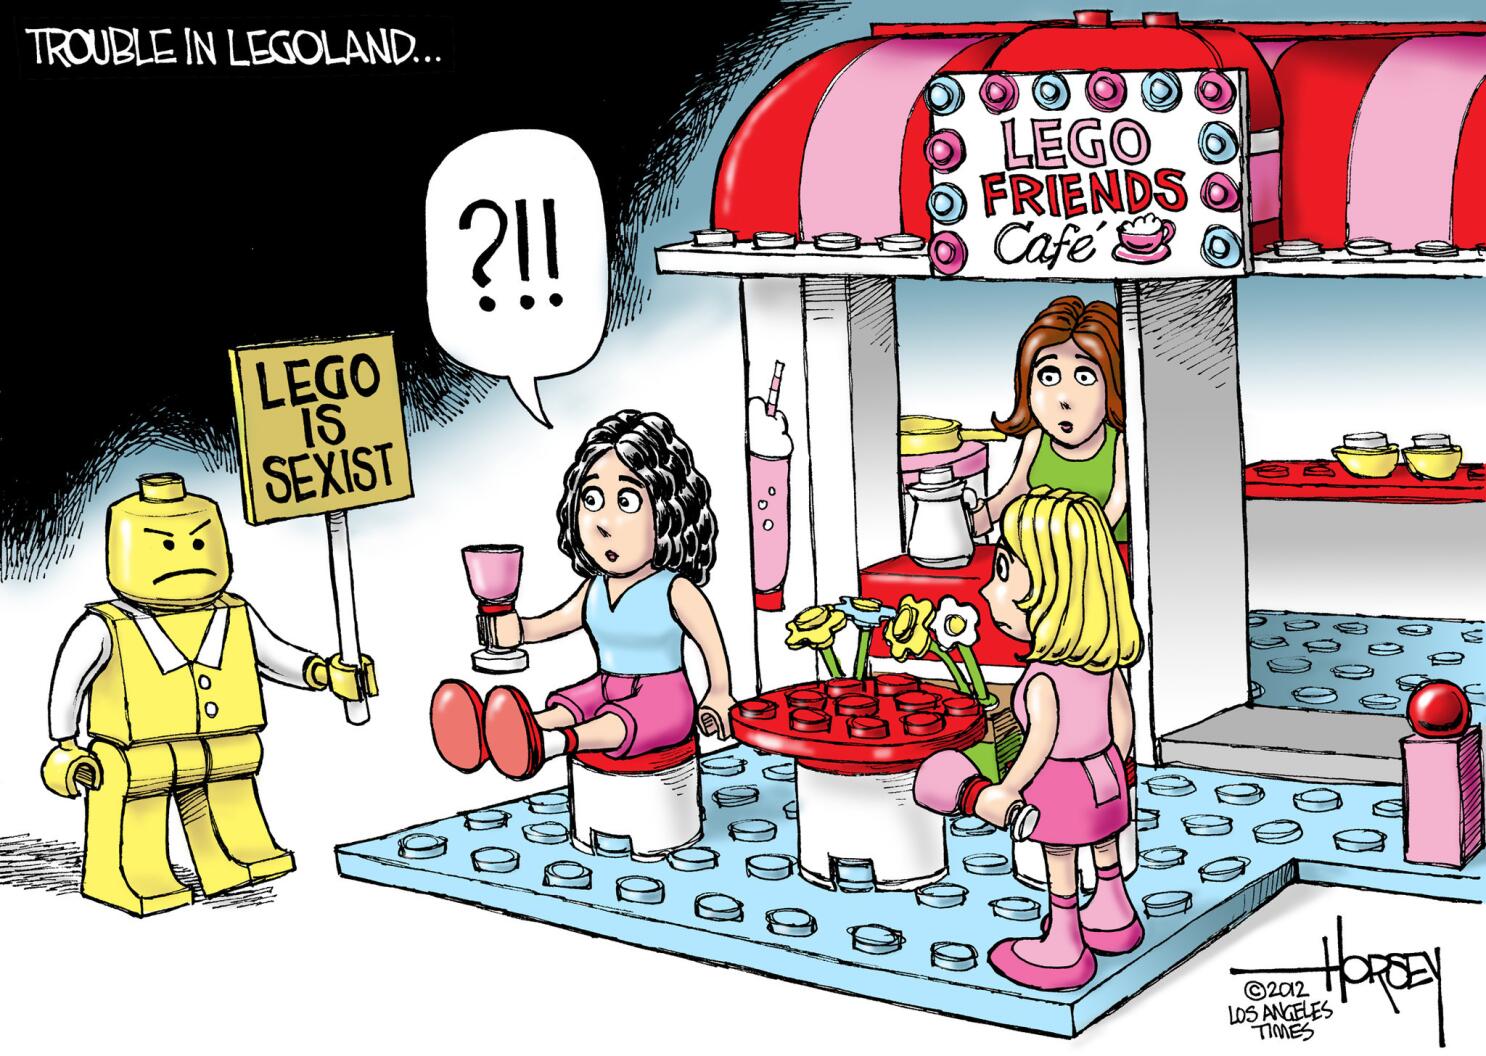 Legos For Girls: Lego Friends To Be Released January 2012